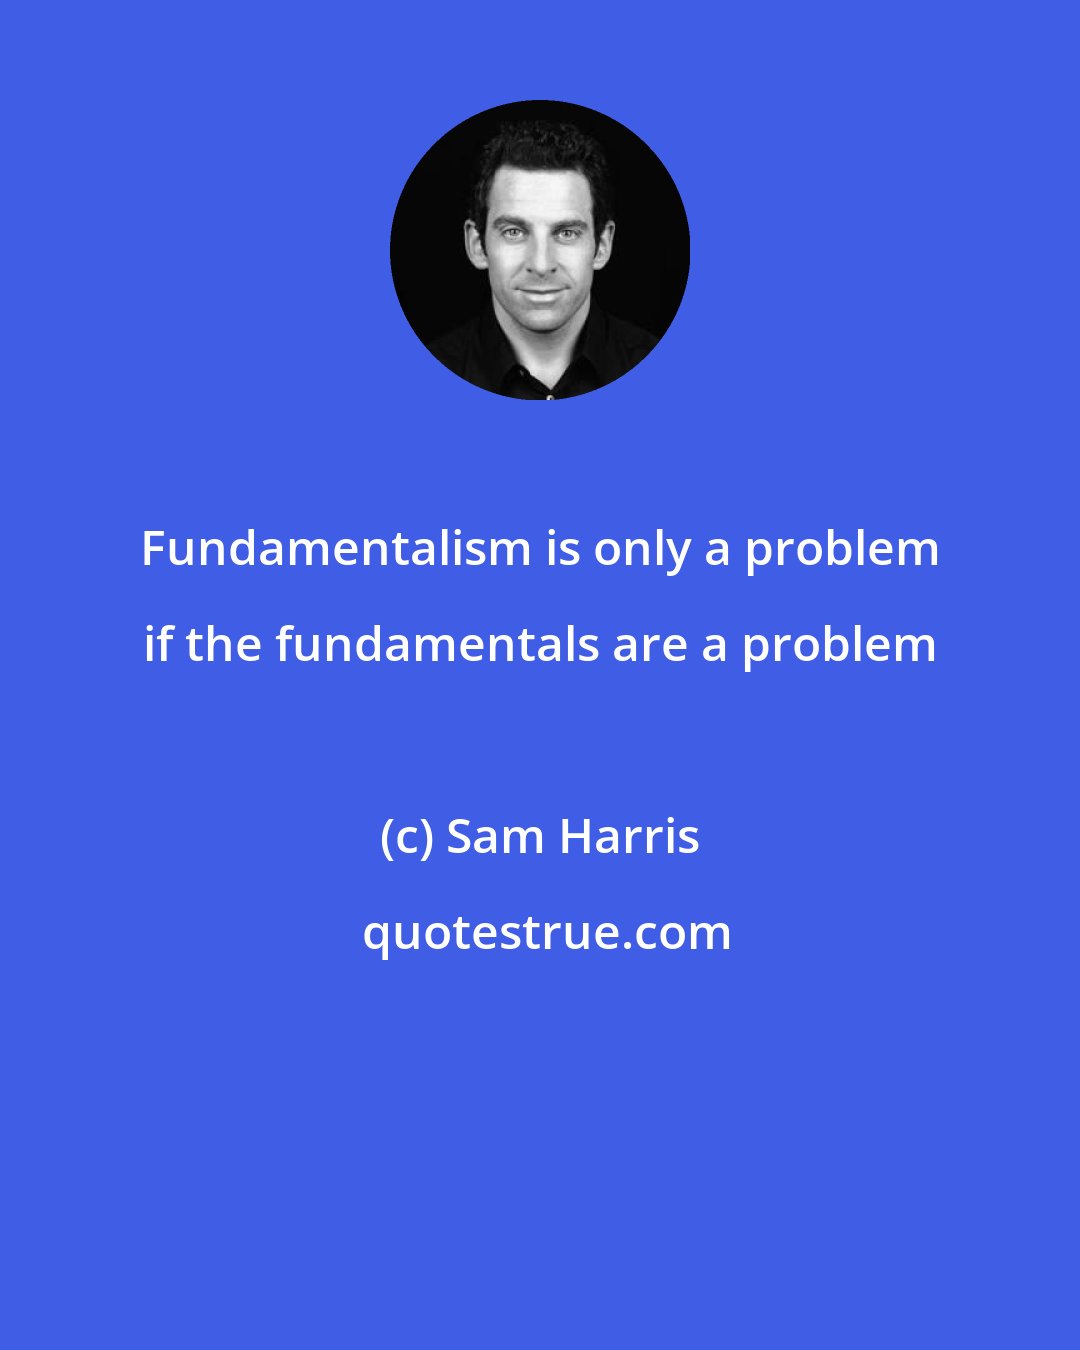 Sam Harris: Fundamentalism is only a problem if the fundamentals are a problem